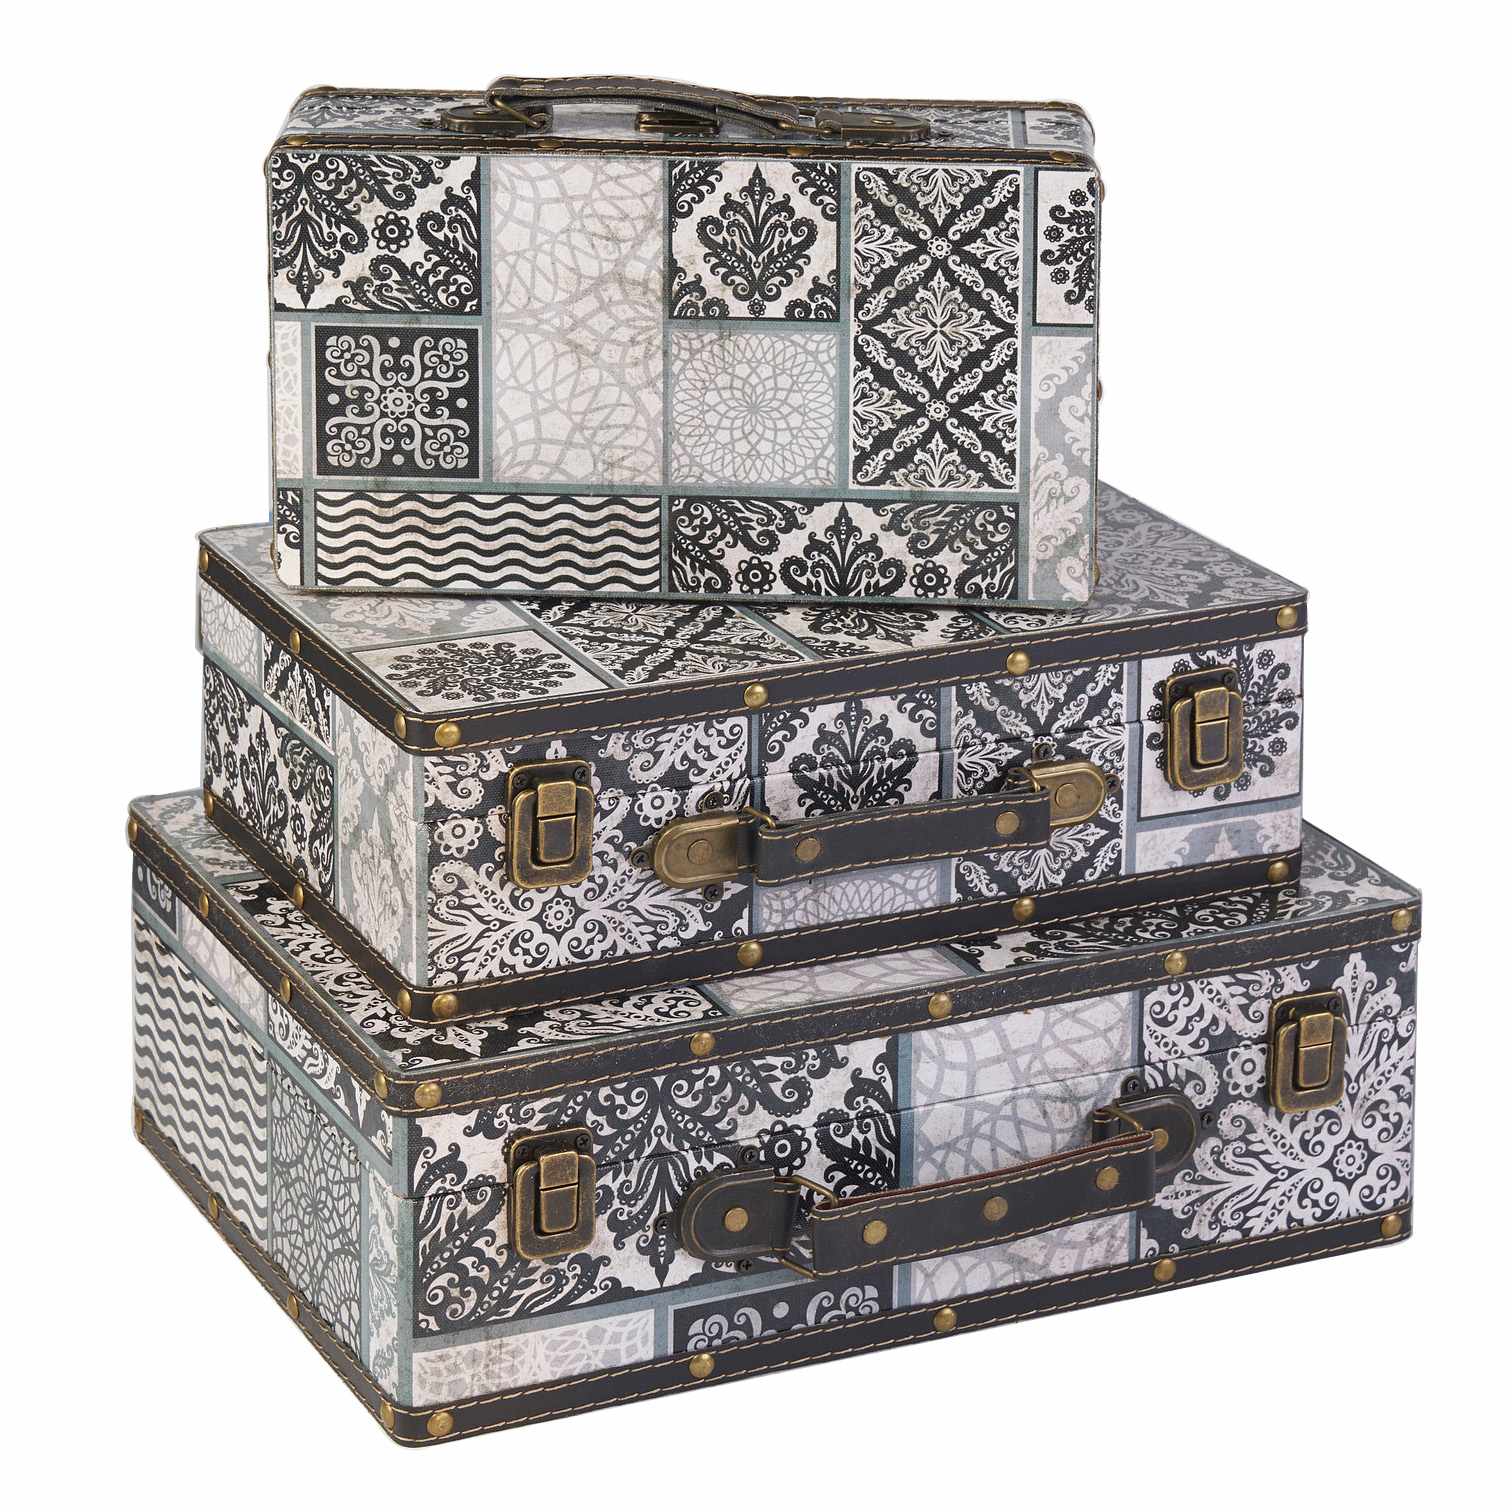 Patterned Suitcases SJ15402